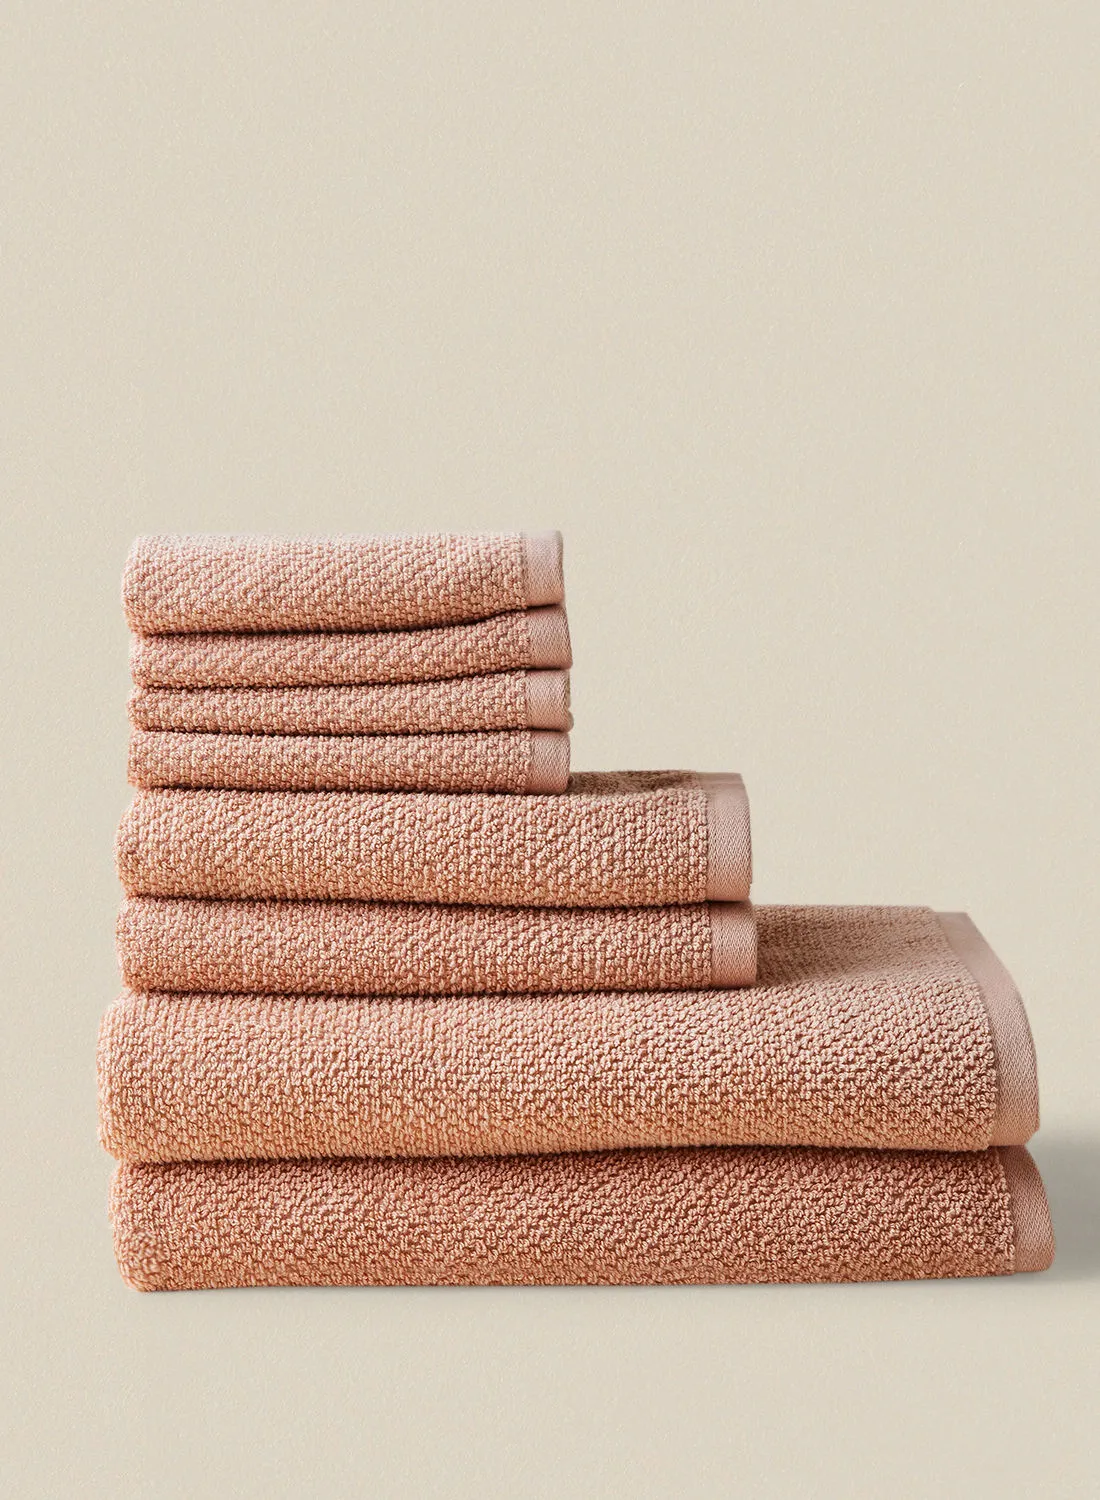 noon east 8 Piece Bathroom Towel Set - 500 GSM 100% Organic Cotton - 2 Hand Towel - 4 Face Towel - 2 Bath Towel - Ginger Color - Highly Absorbent - Fast Dry